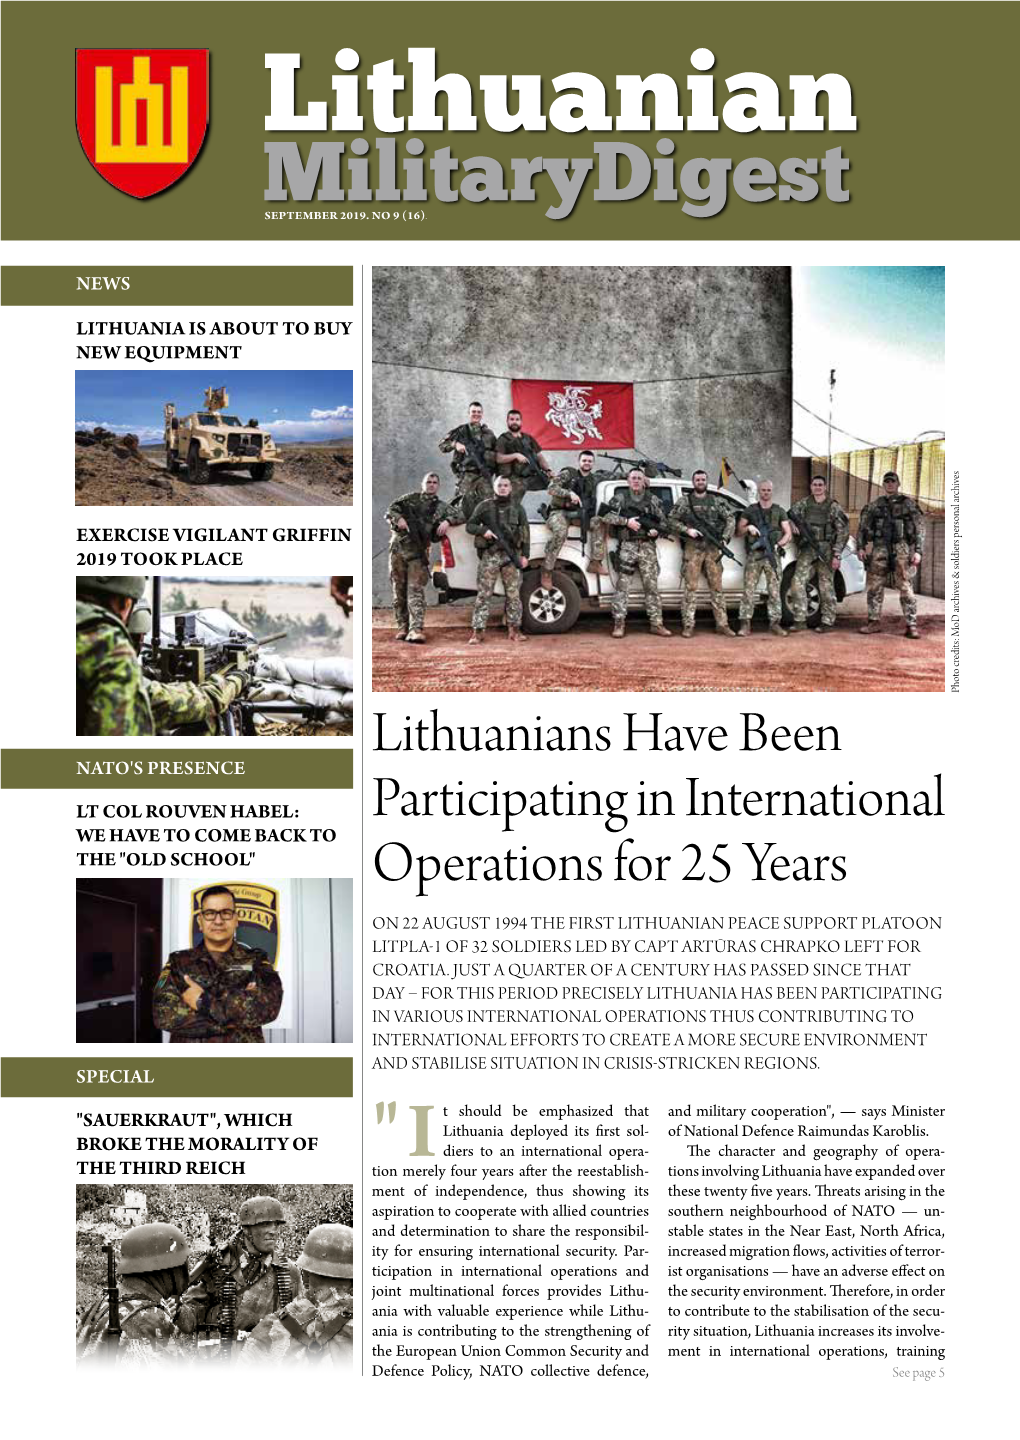 Lithuanians Have Been Participating in International Operations for 25